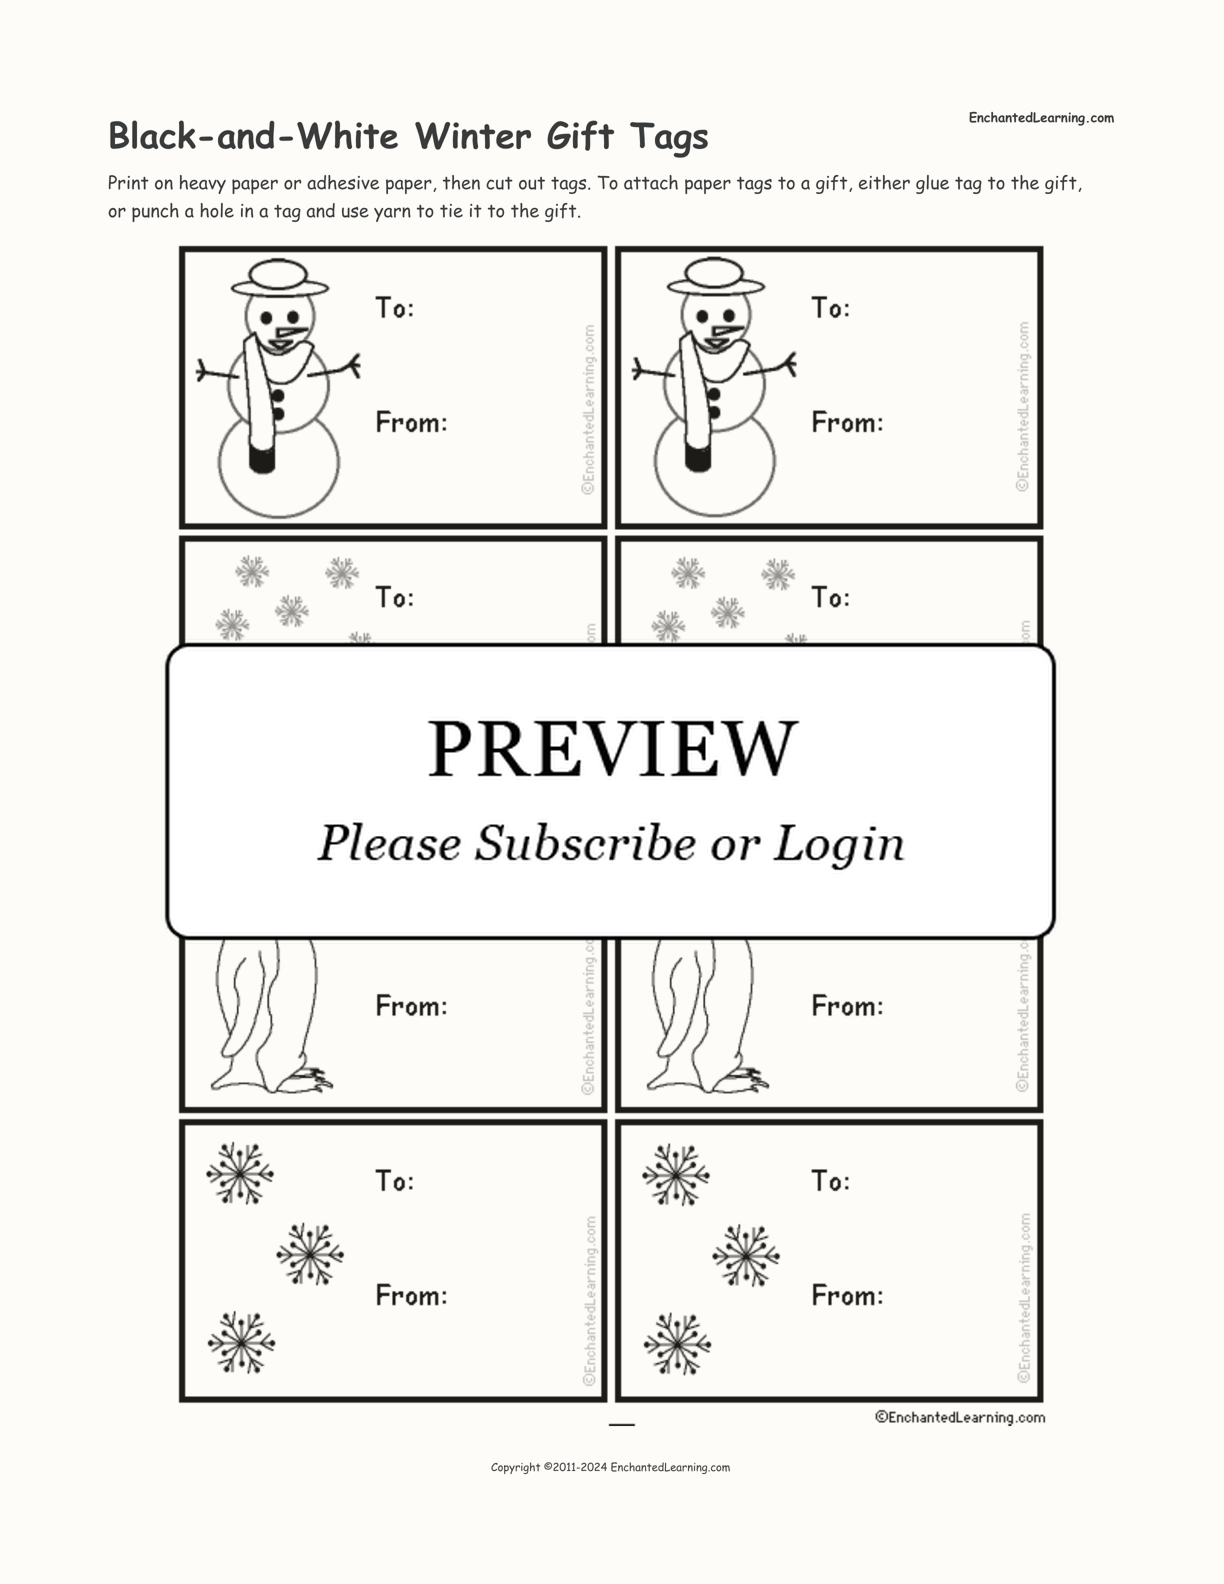 Black-and-White Winter Gift Tags interactive printout page 1